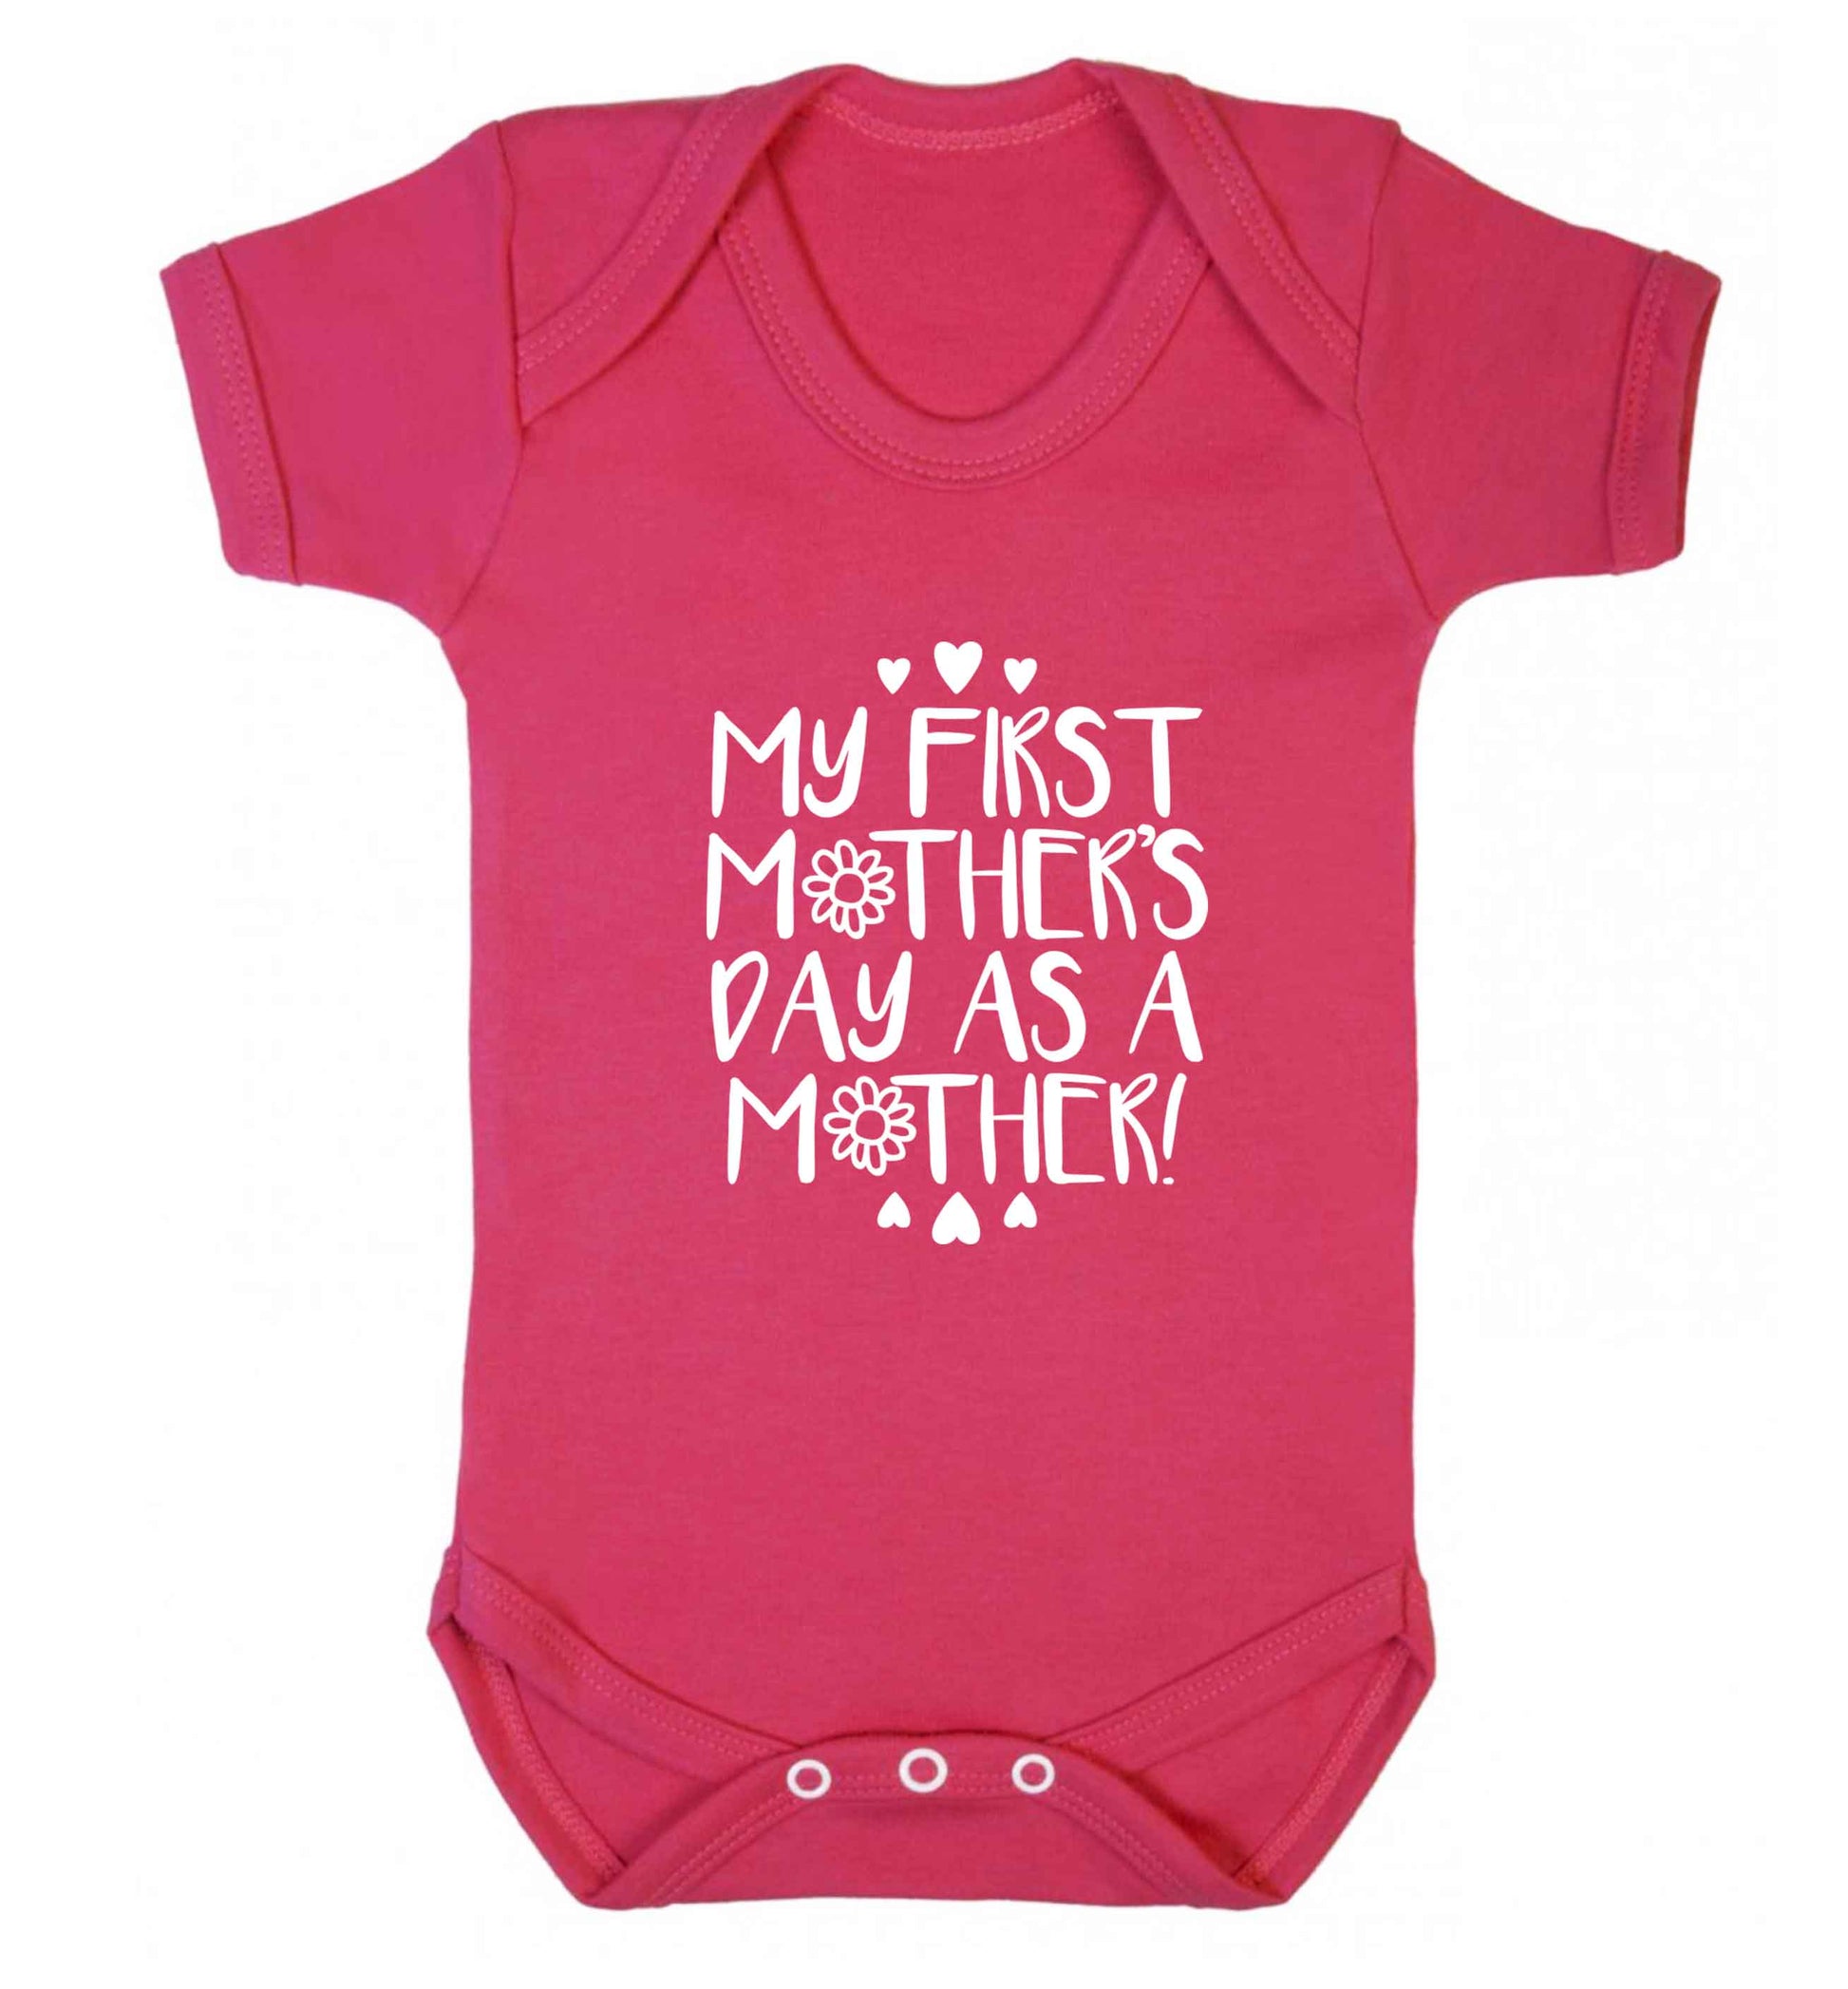 It's my first mother's day as a mother baby vest dark pink 18-24 months